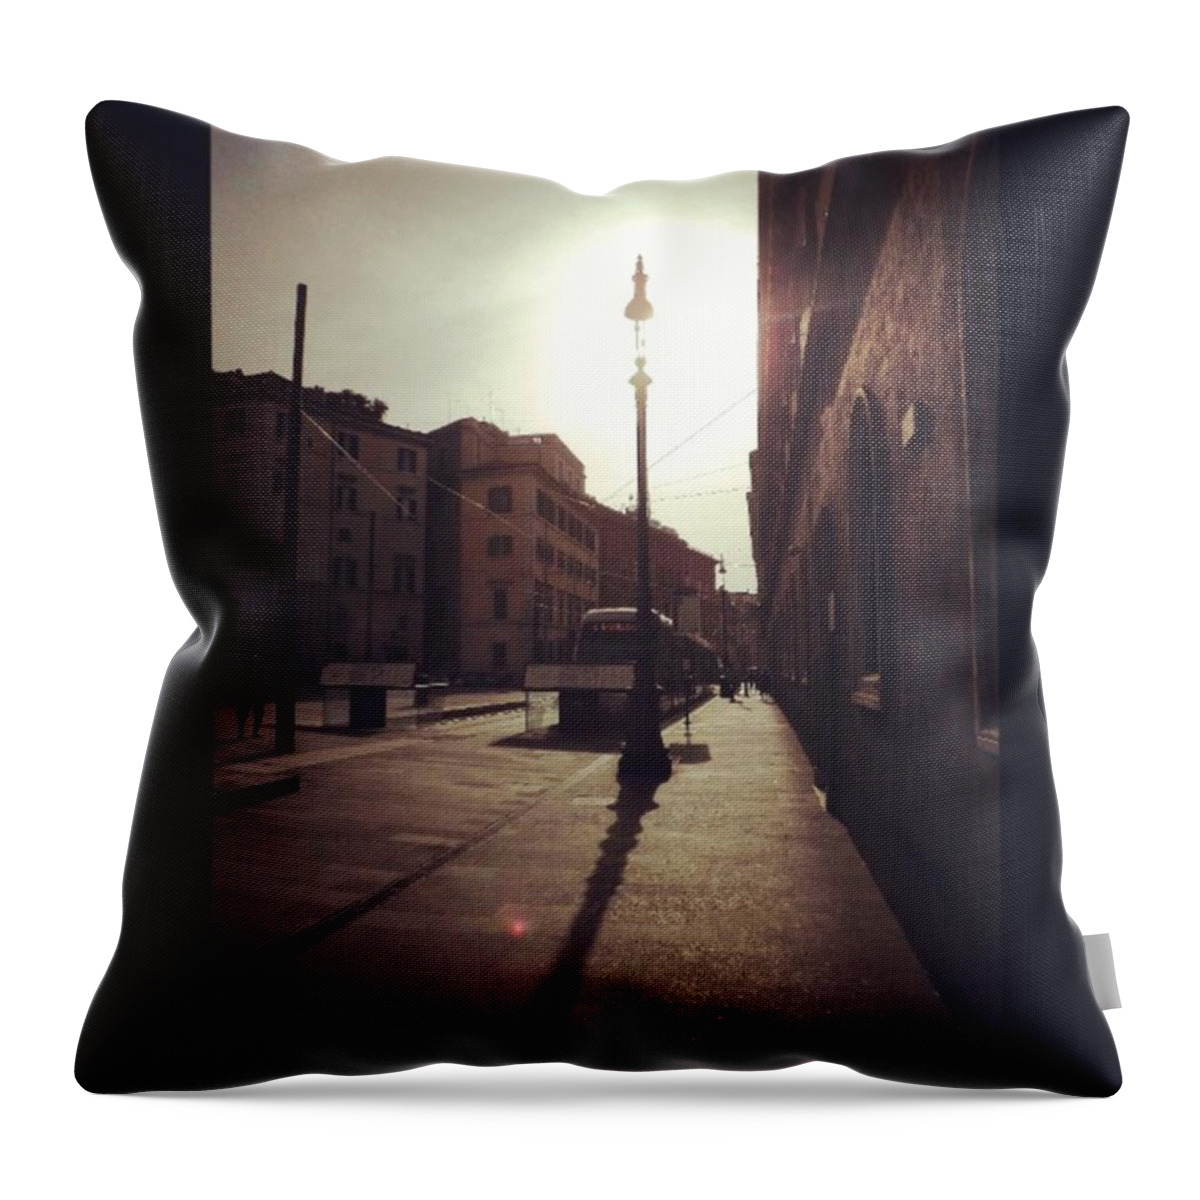 Brown Throw Pillow featuring the photograph #centrodiroma #mezzipubblici #light by Lorin Braticevici